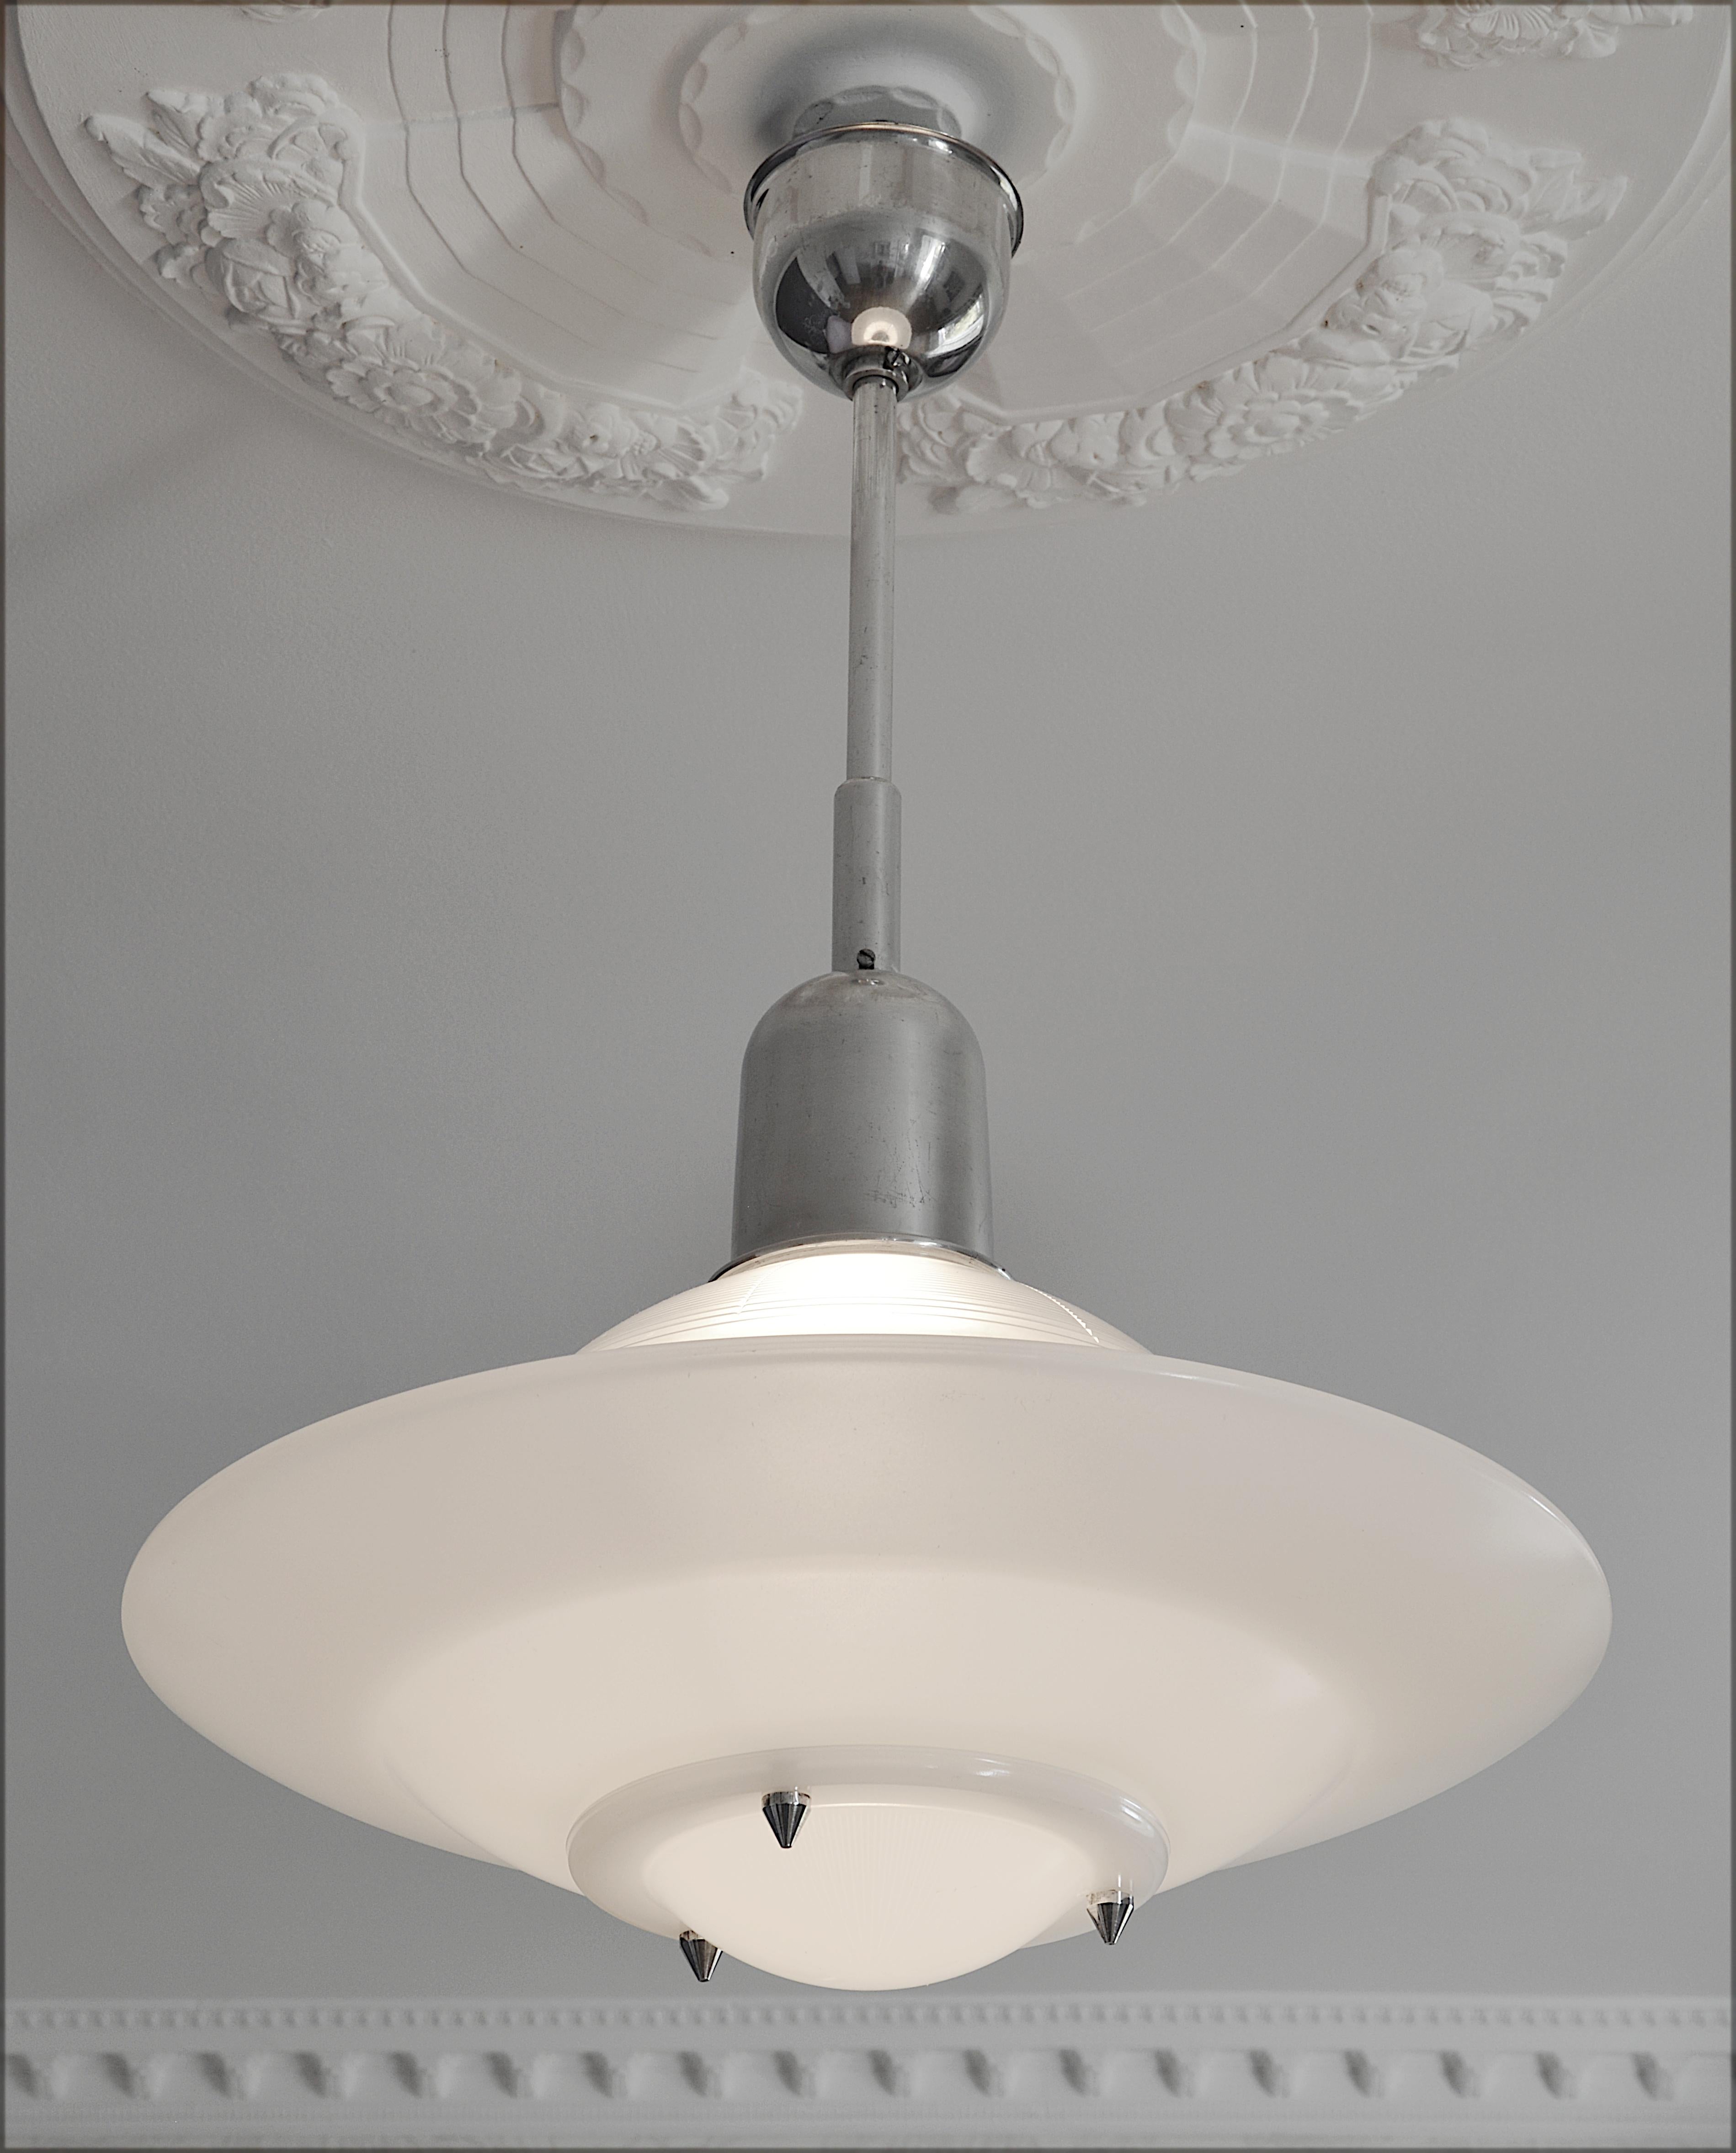 French modernist Art Deco pendant chandelier, France, 1930s. Milk glass lower shade. Large and heavy. Measures: Height 27.5